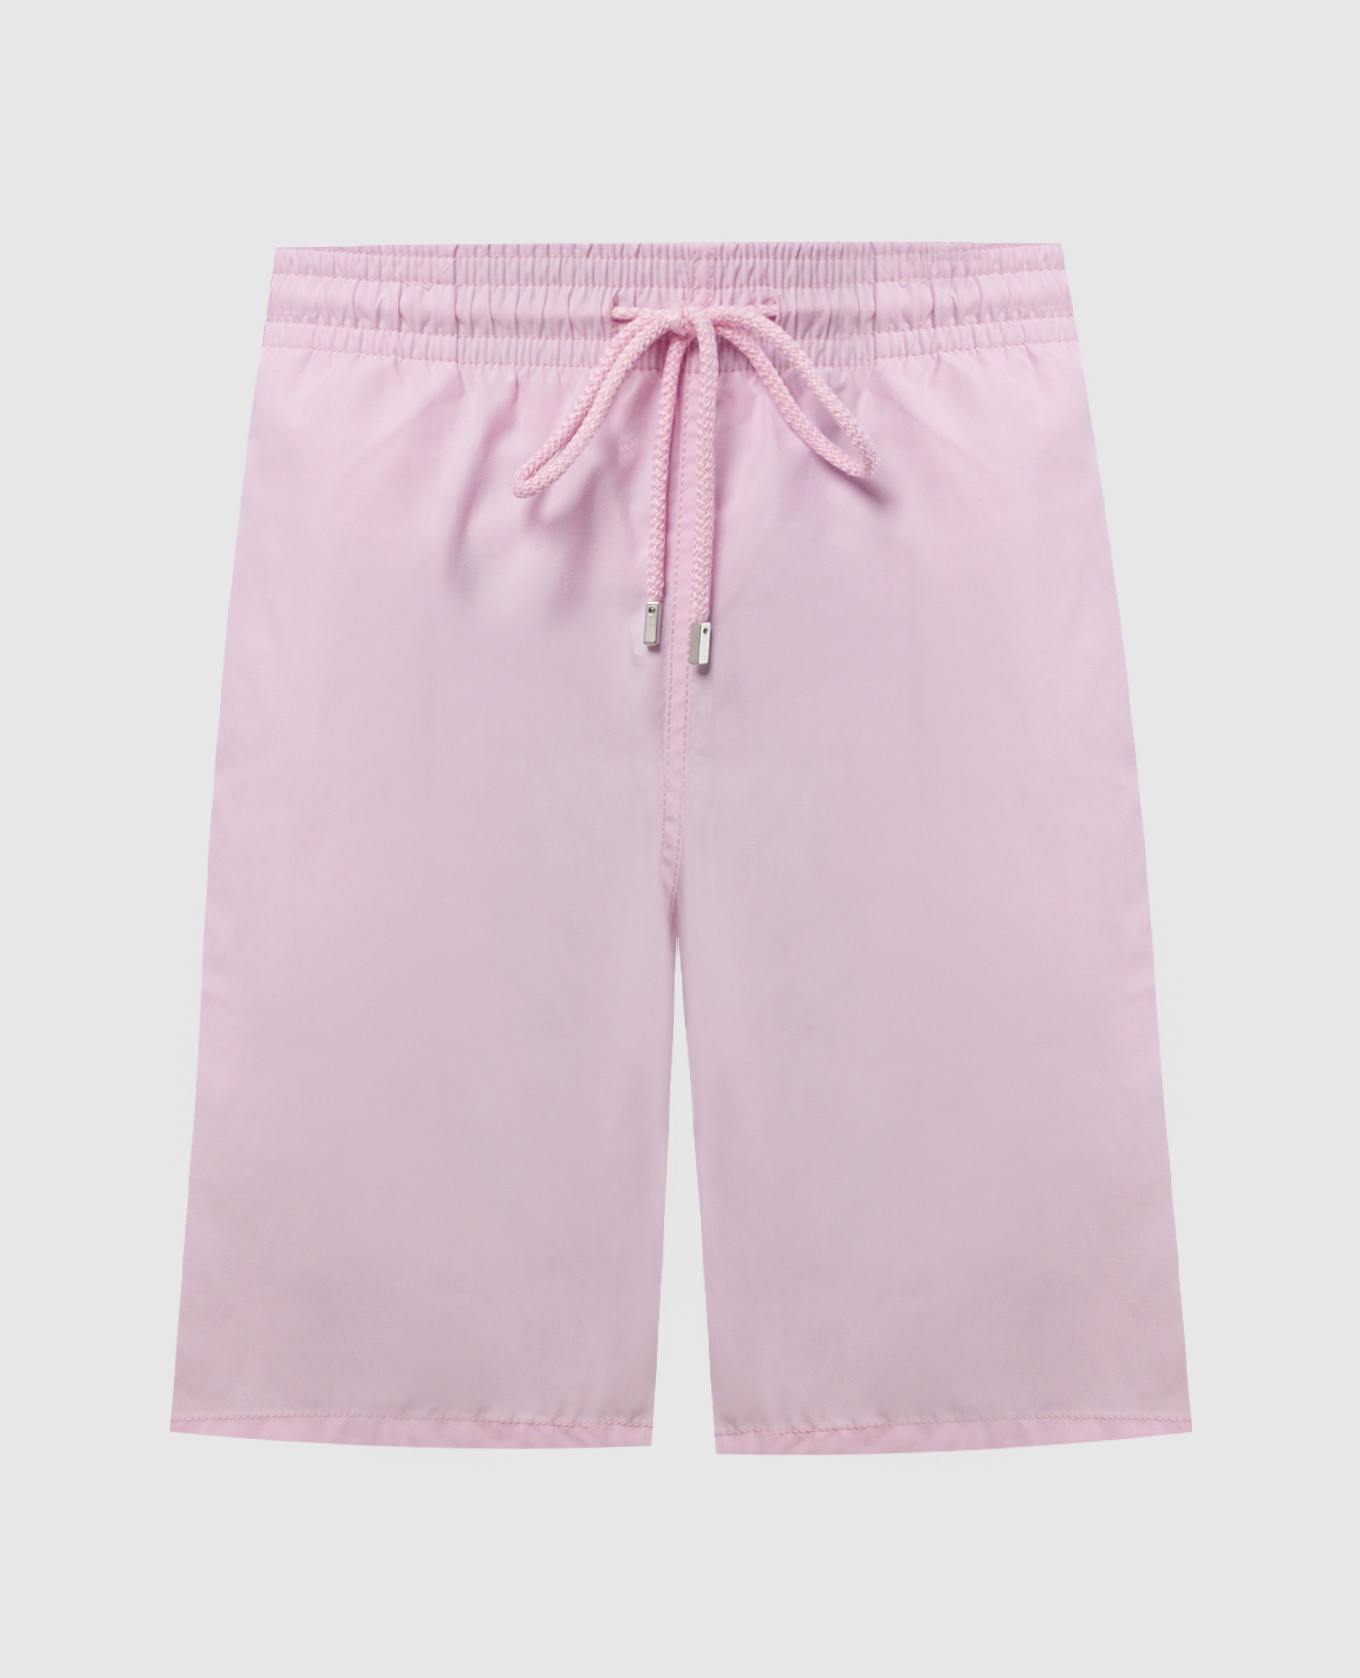 Moorea swim shorts in pink with logo patch